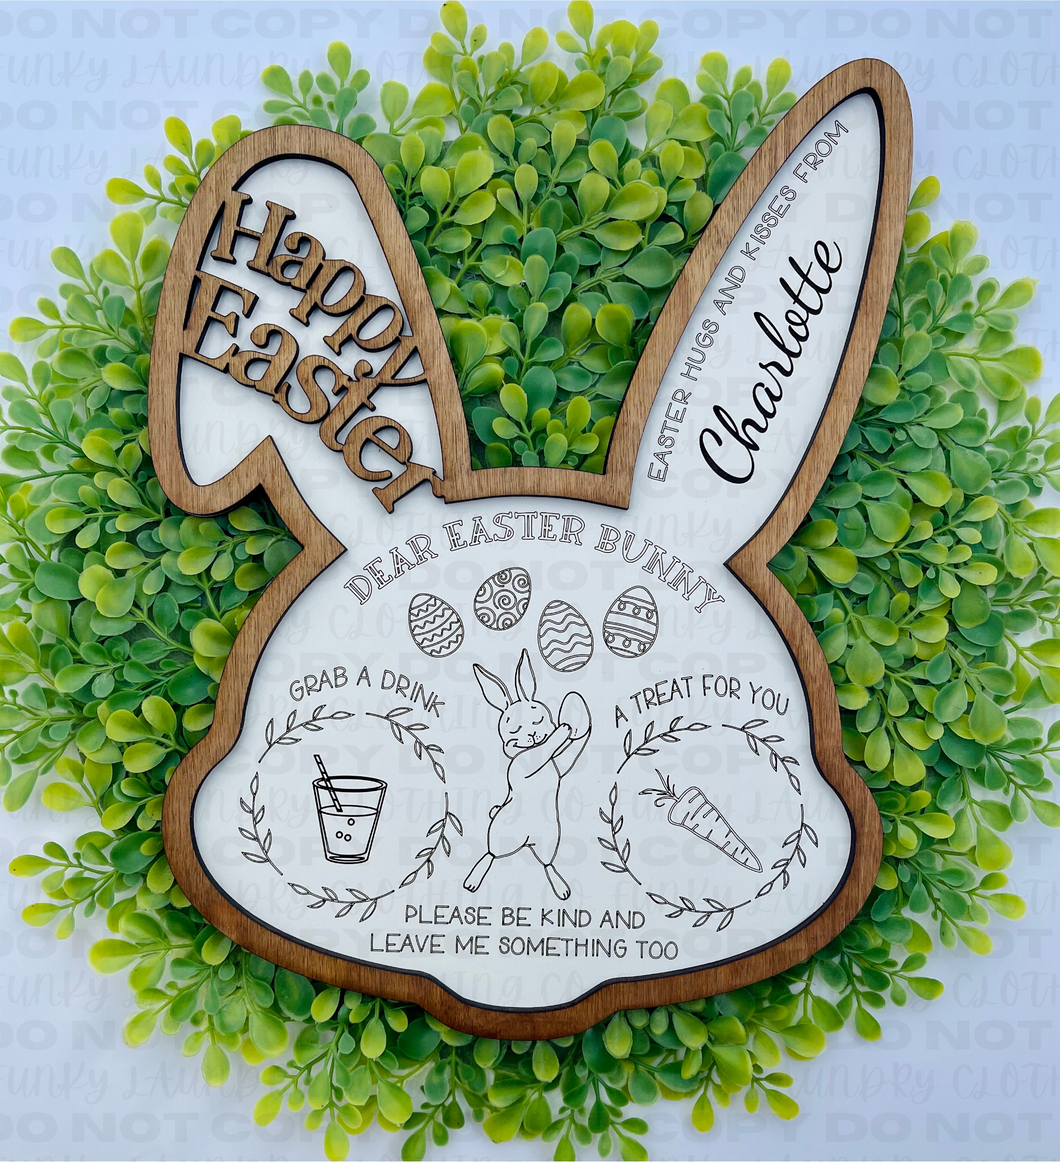 Hop into Easter with a Personalized Handmade Bunny Treat Tray